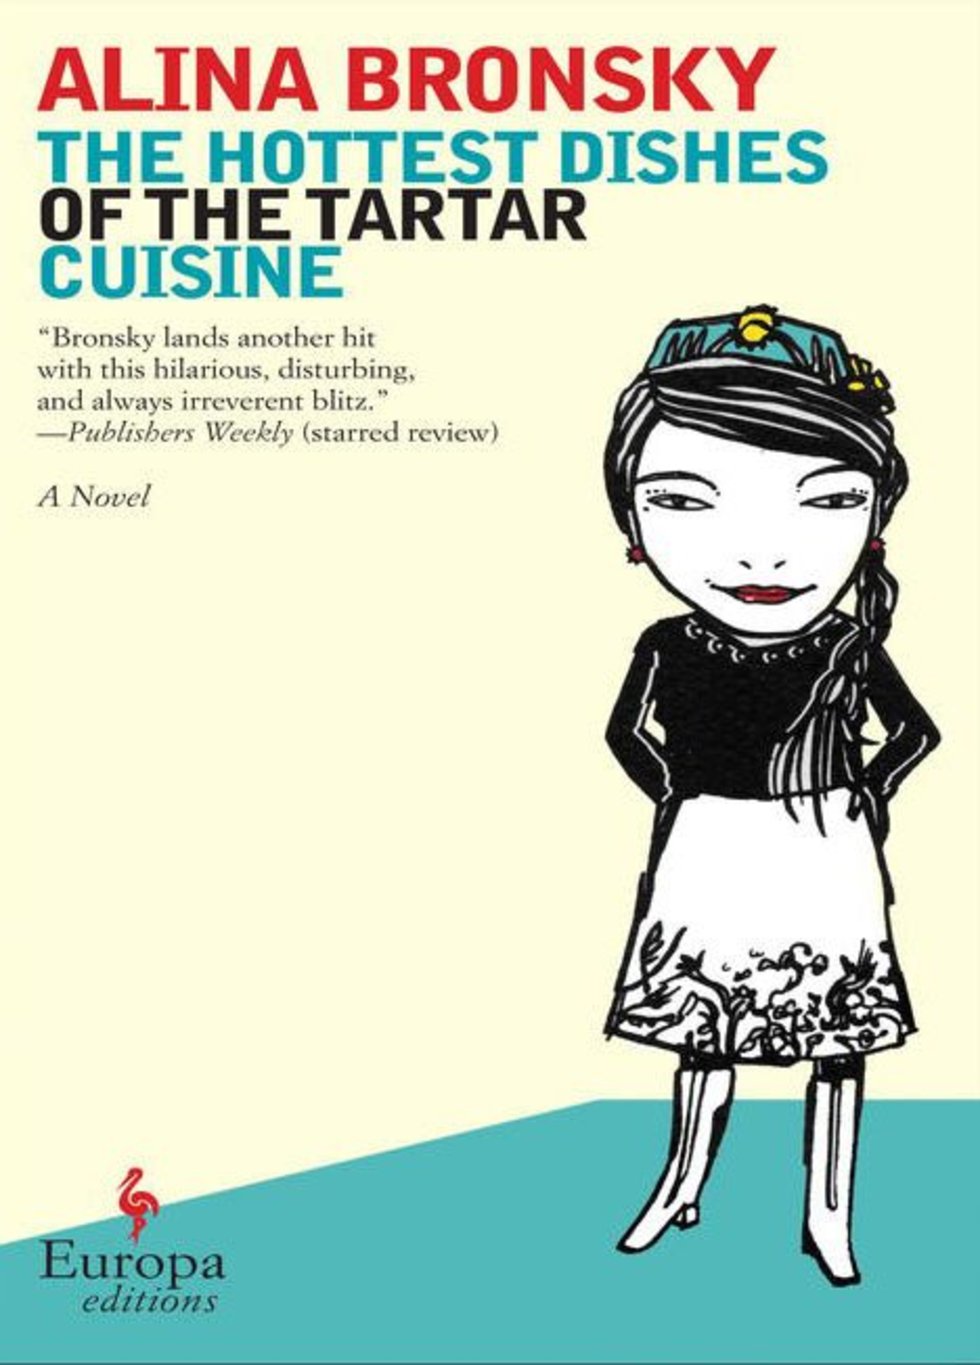 The Hottest Dishes of the Tartar Cuisine by Alina Bronsky